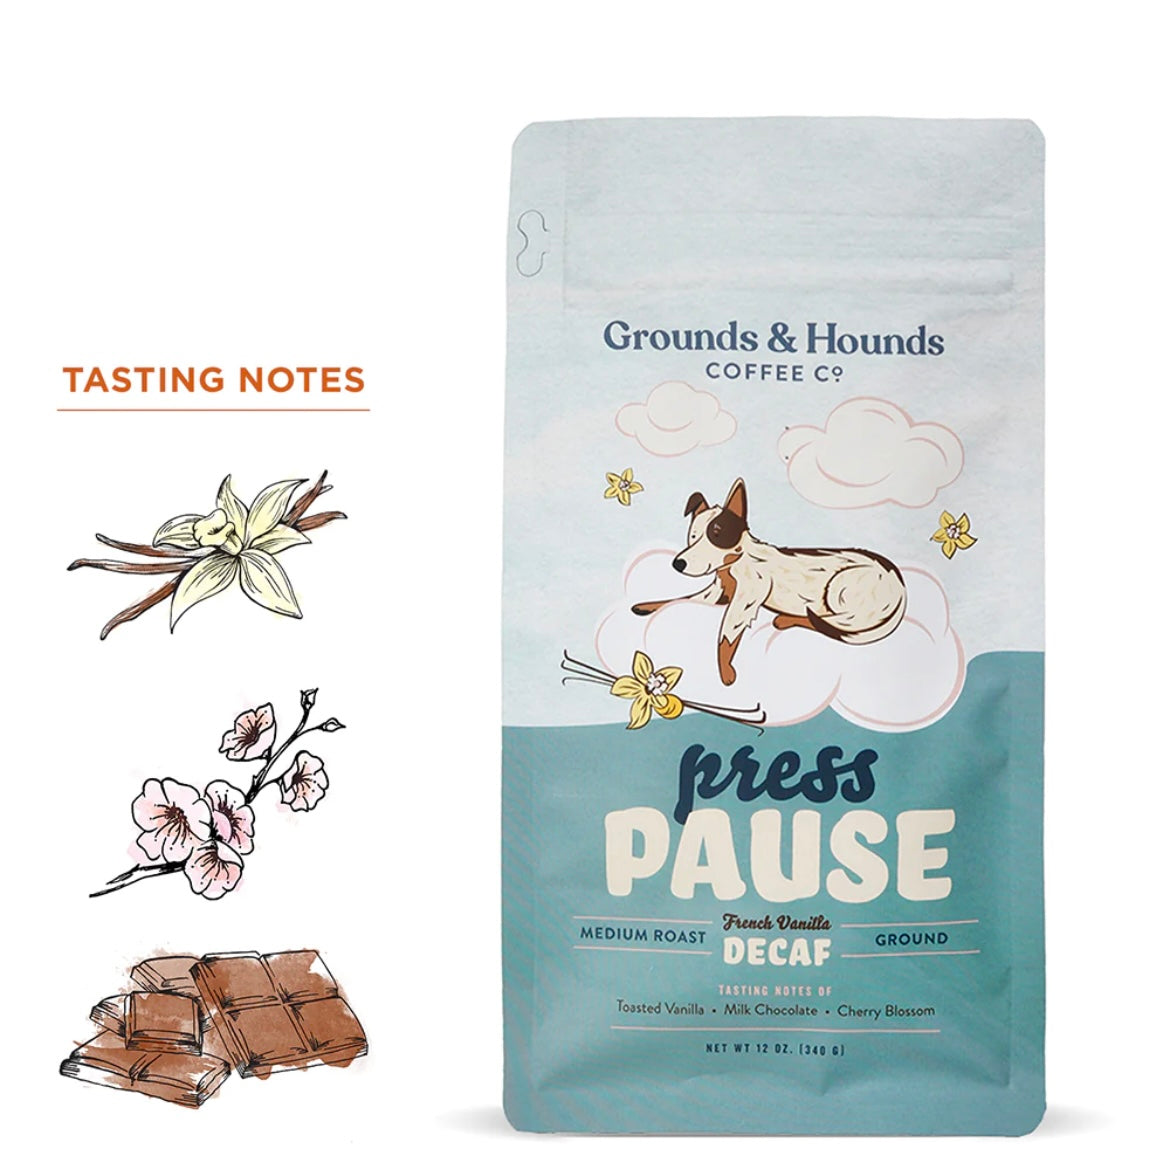 Grounds & Hounds Decaf Ground Coffee